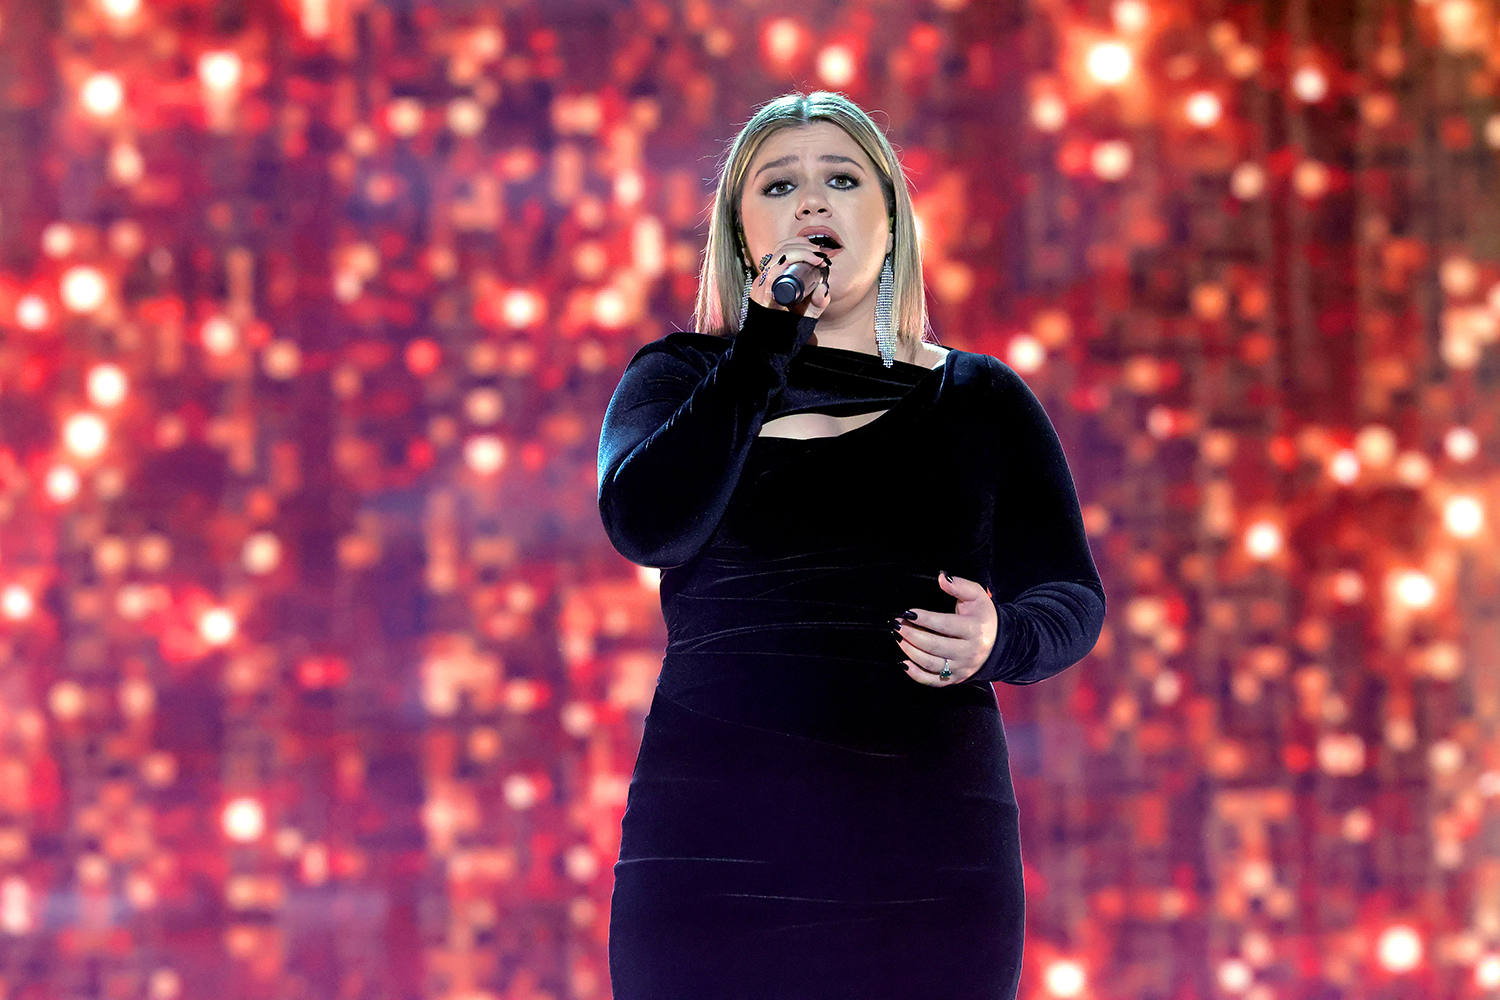 Kelly Clarkson, co-host of American Song Contest, performs at the 57th Academy of Country Music Awards